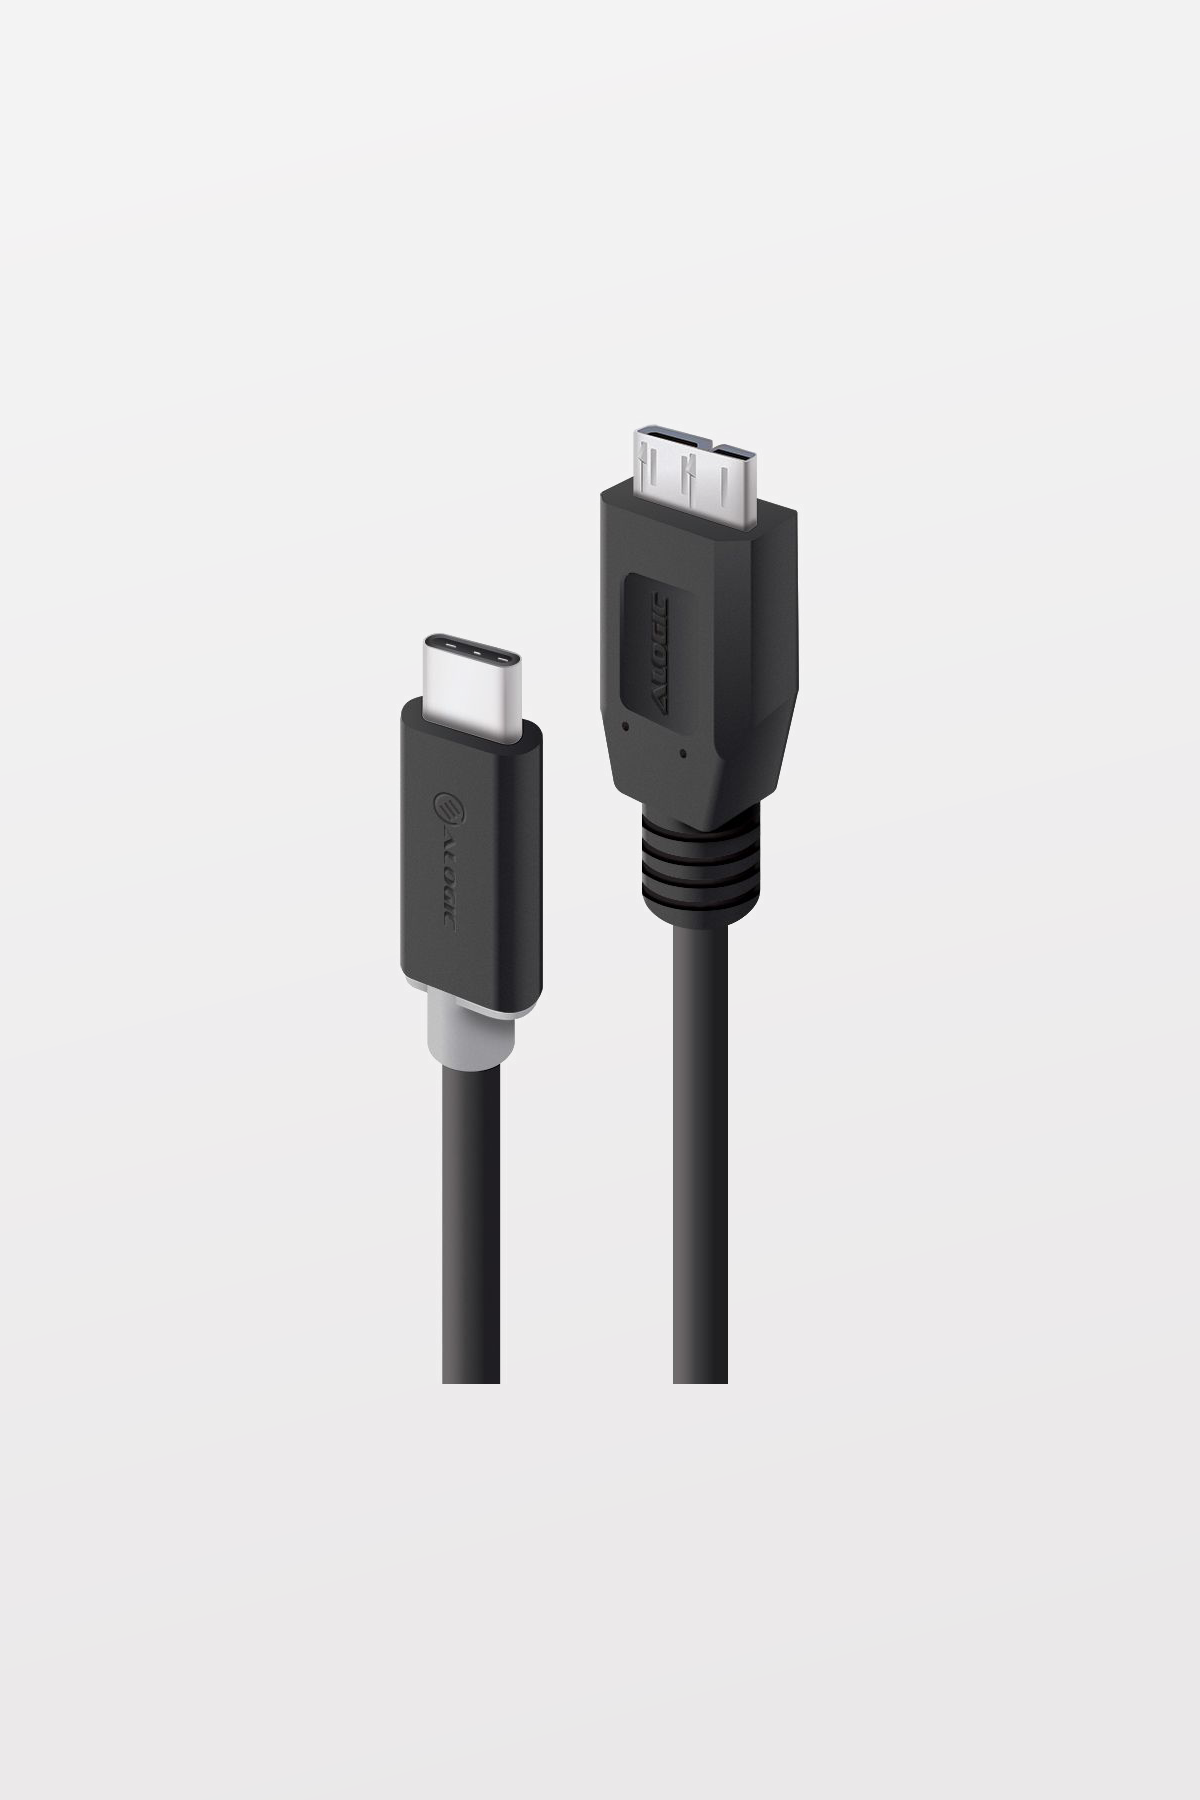 ALOGIC USB-C to Micro USB-B Cable - USB 3.0 (5Gbps) - 1m